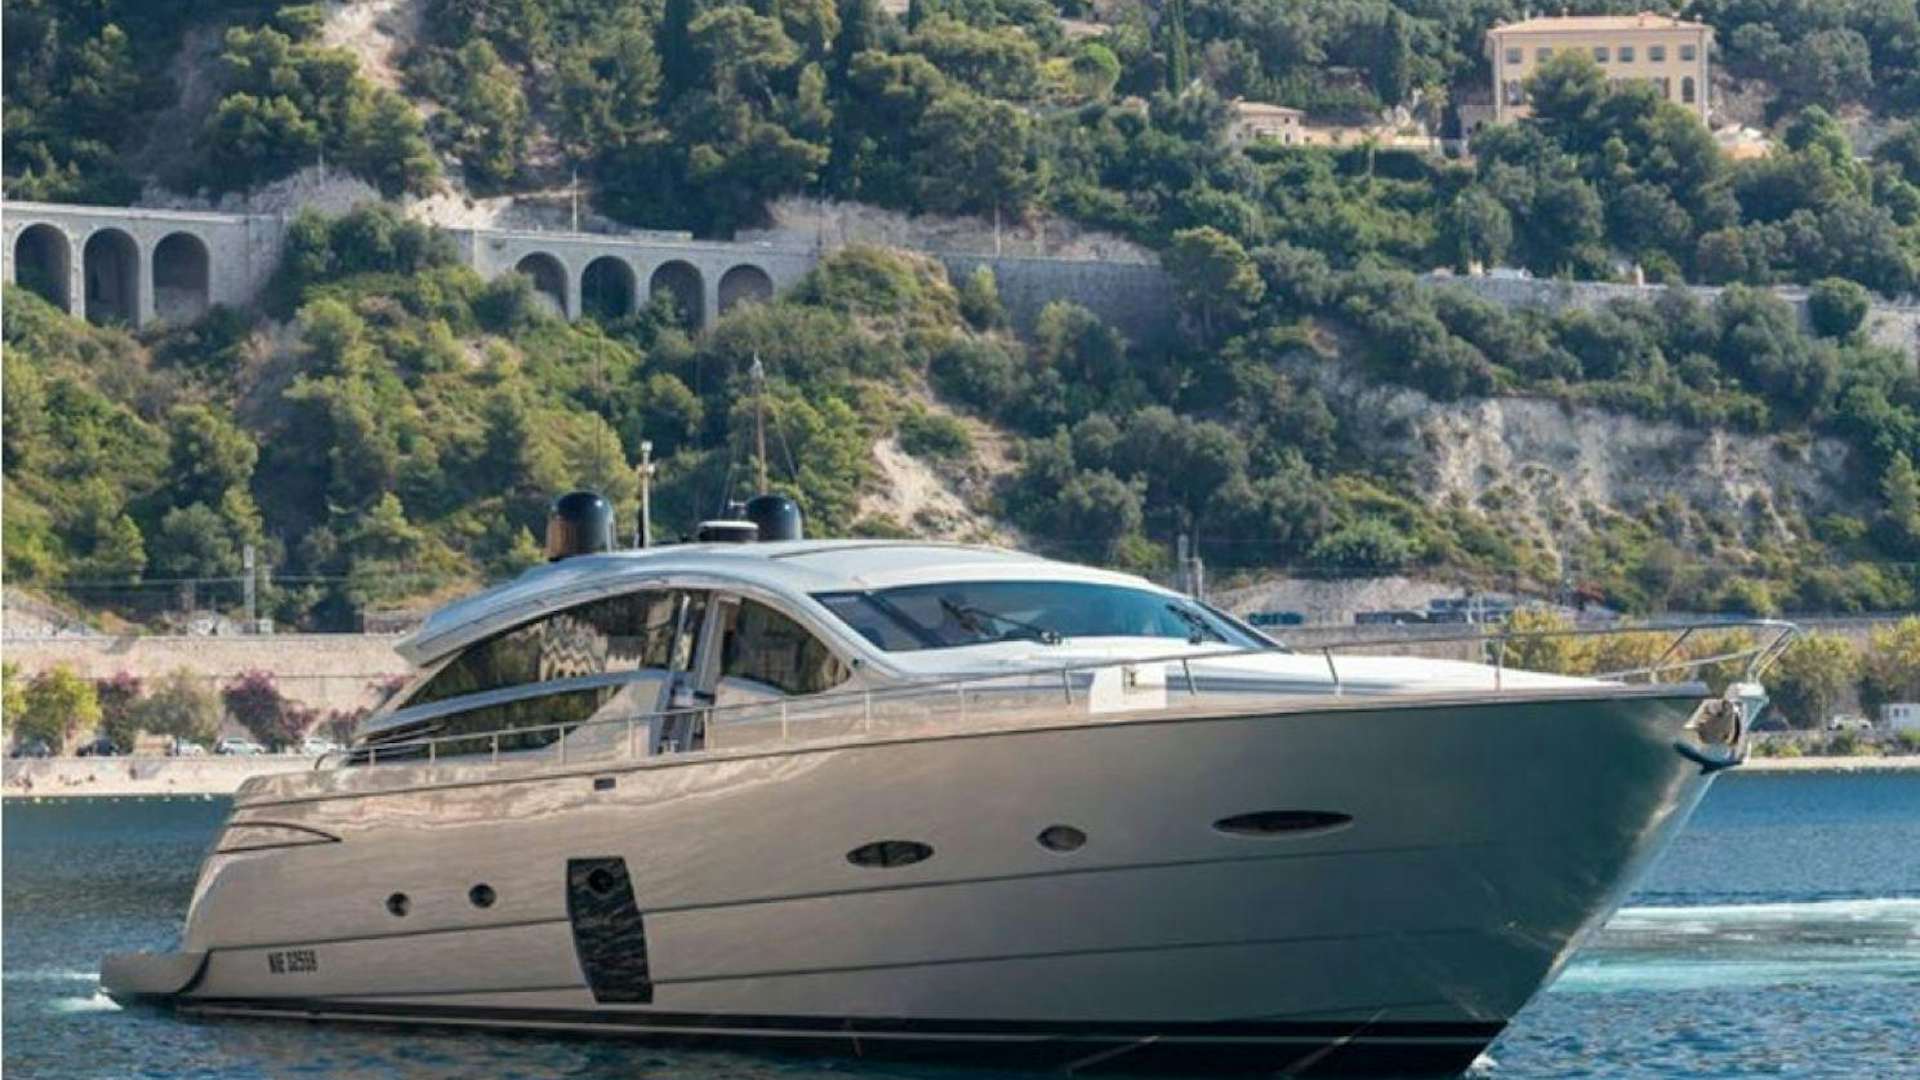 Watch Video for LOUNOR Yacht for Sale